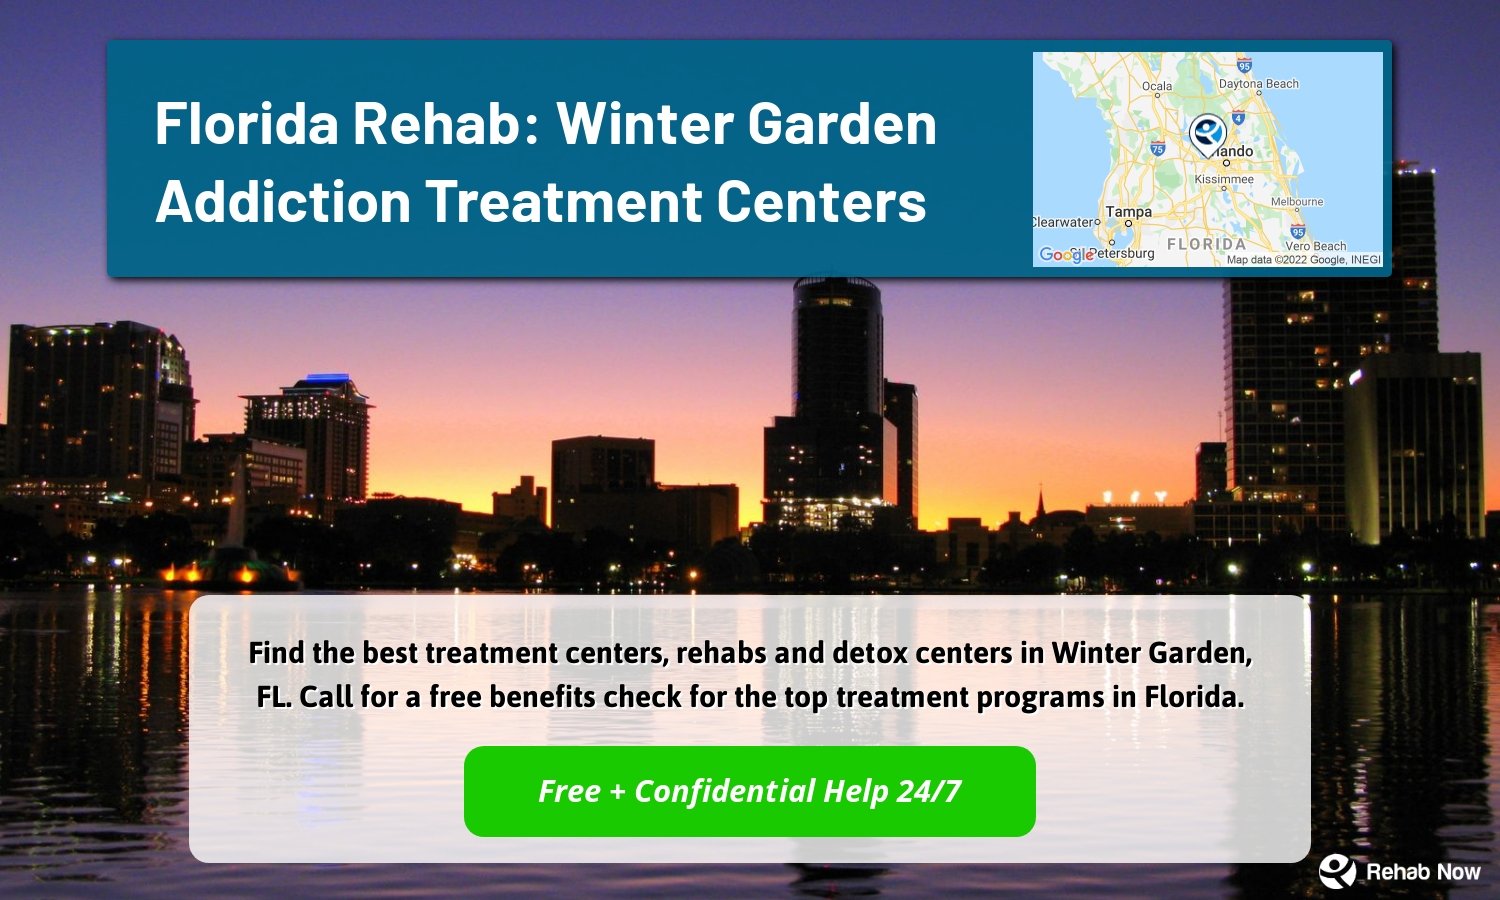 Find the best treatment centers, rehabs and detox centers in Winter Garden, FL. Call for a free benefits check for the top treatment programs in Florida.